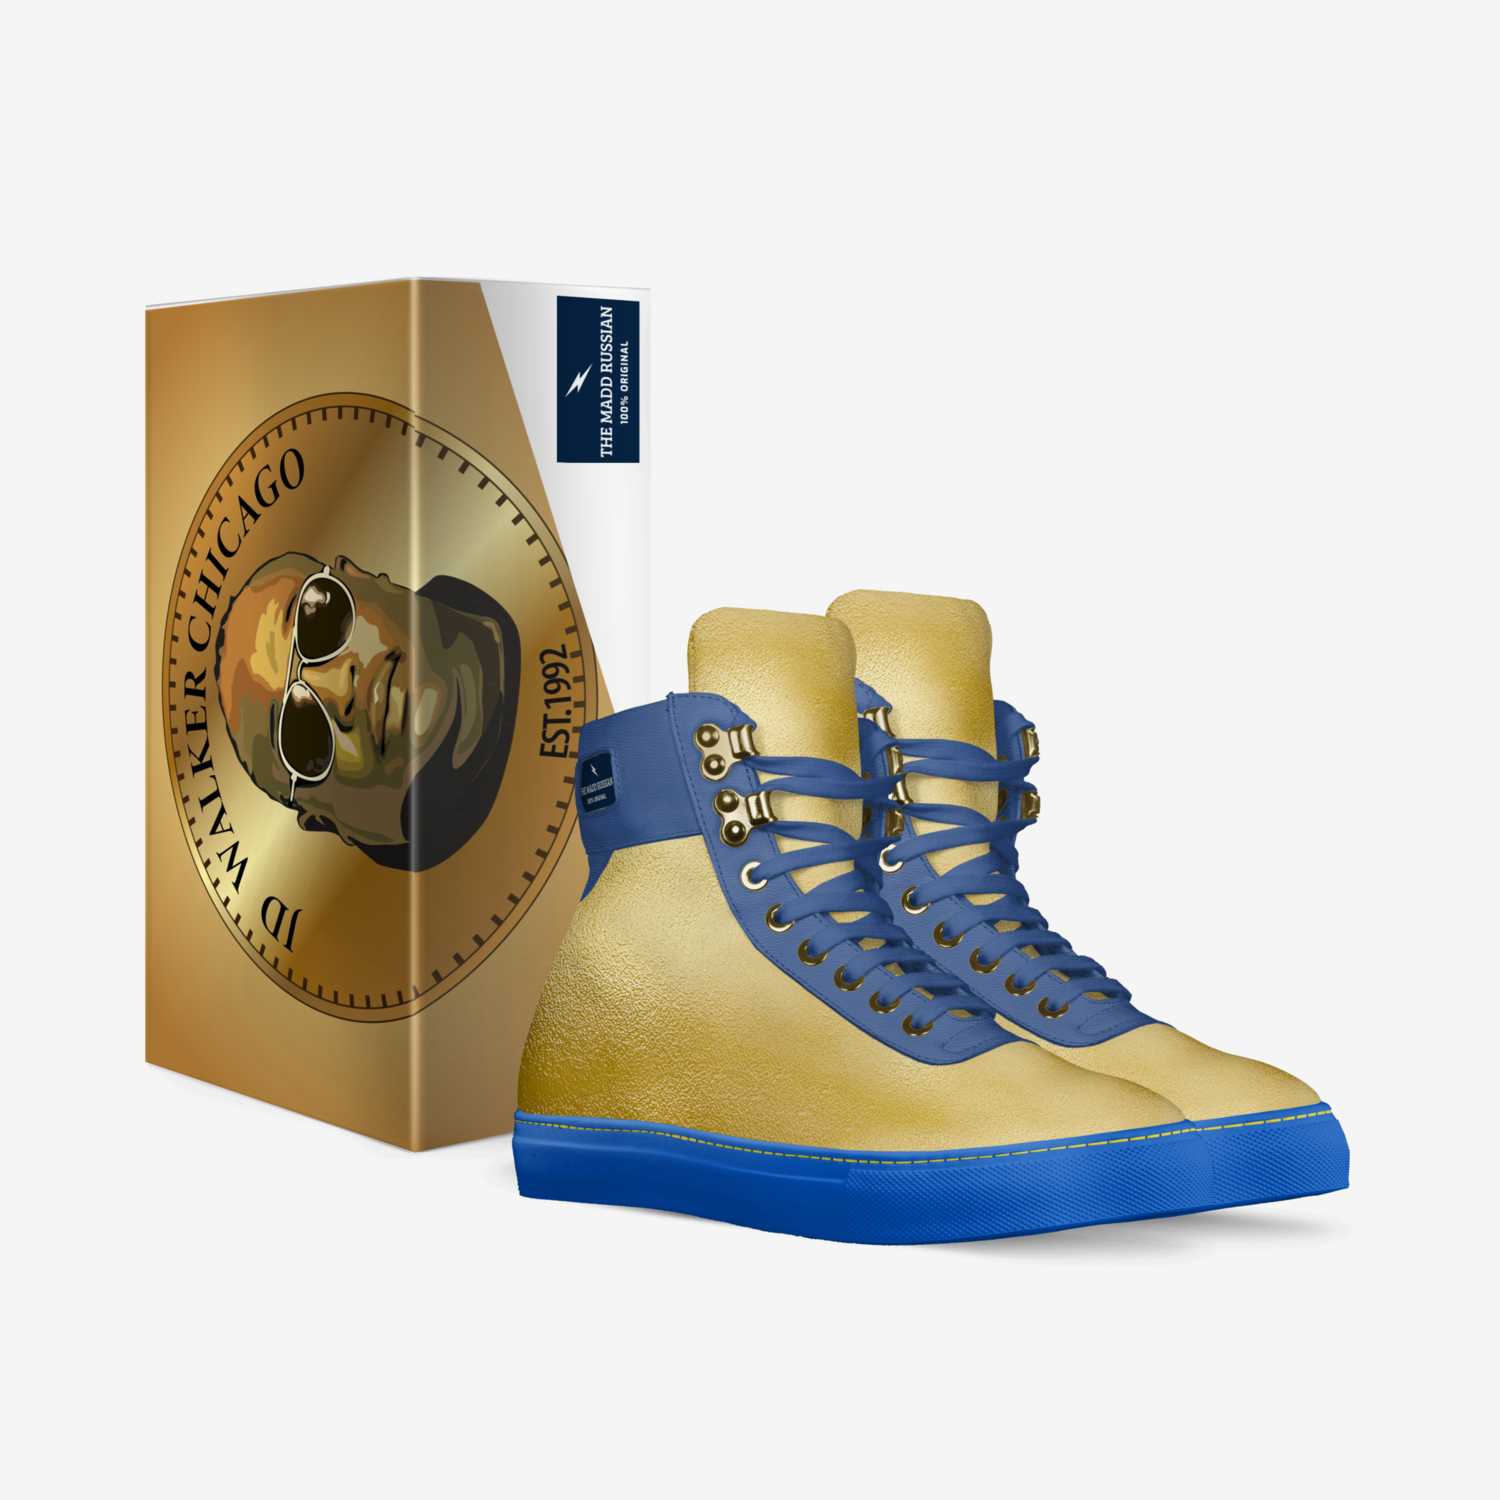 The Madd Russian custom made in Italy shoes by Jd Walker | Box view